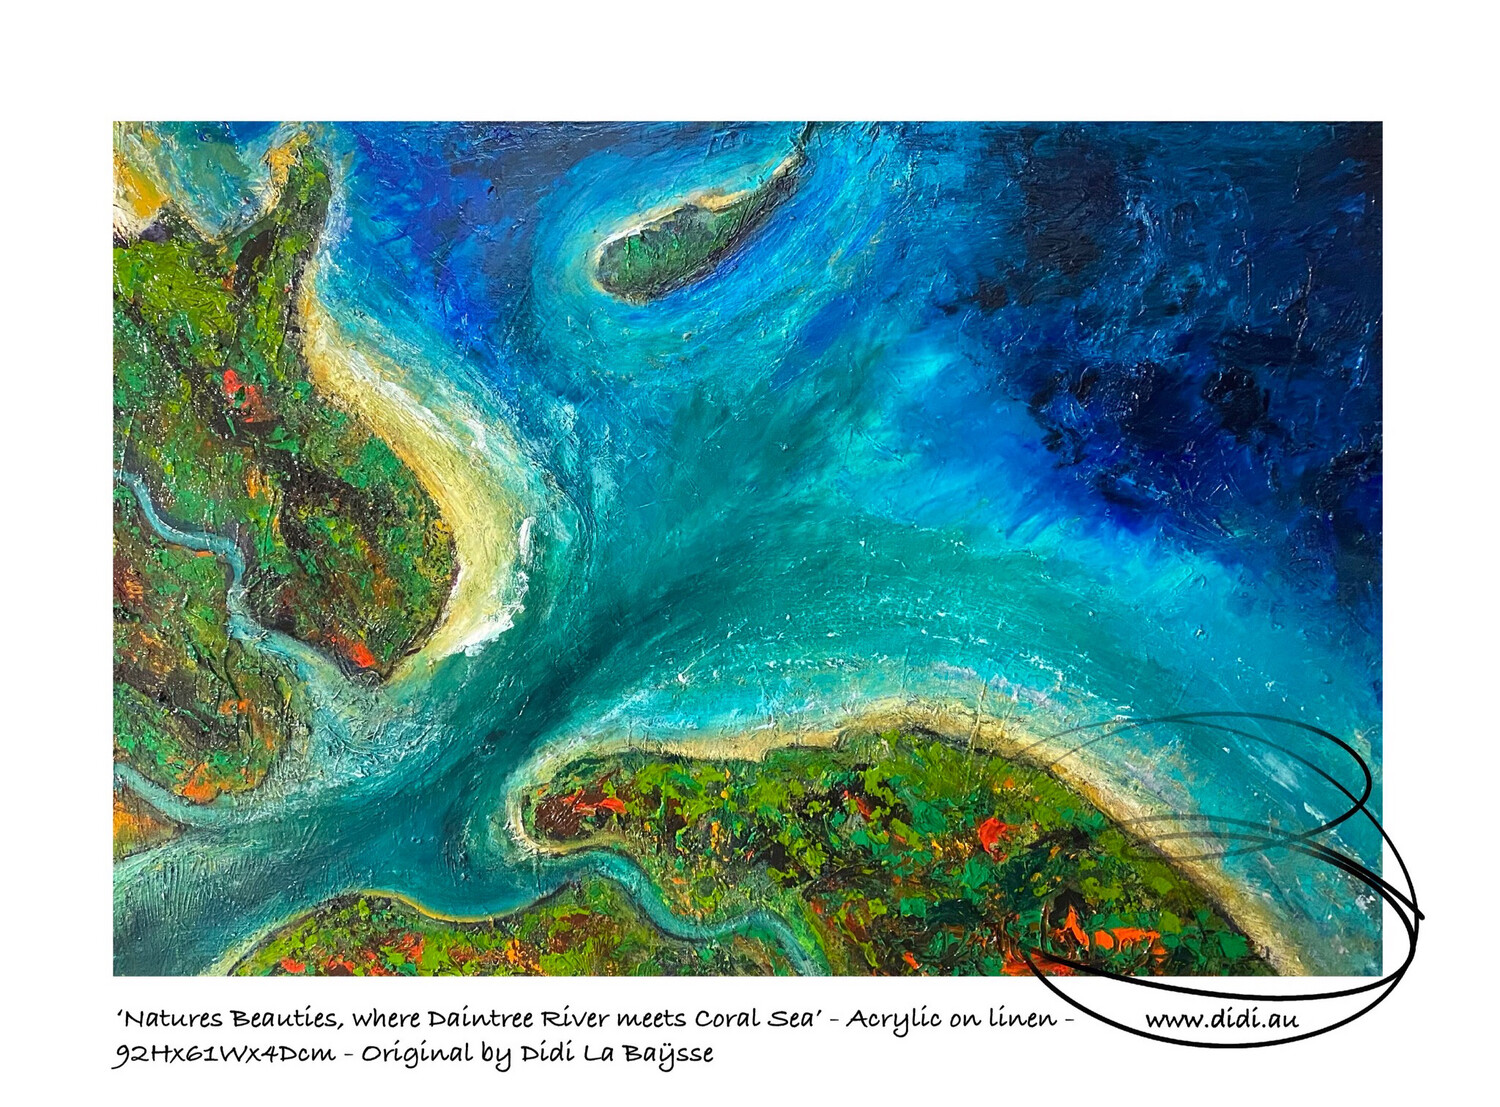 ‘Natures Beauties, where Daintree River meets Coral Sea’